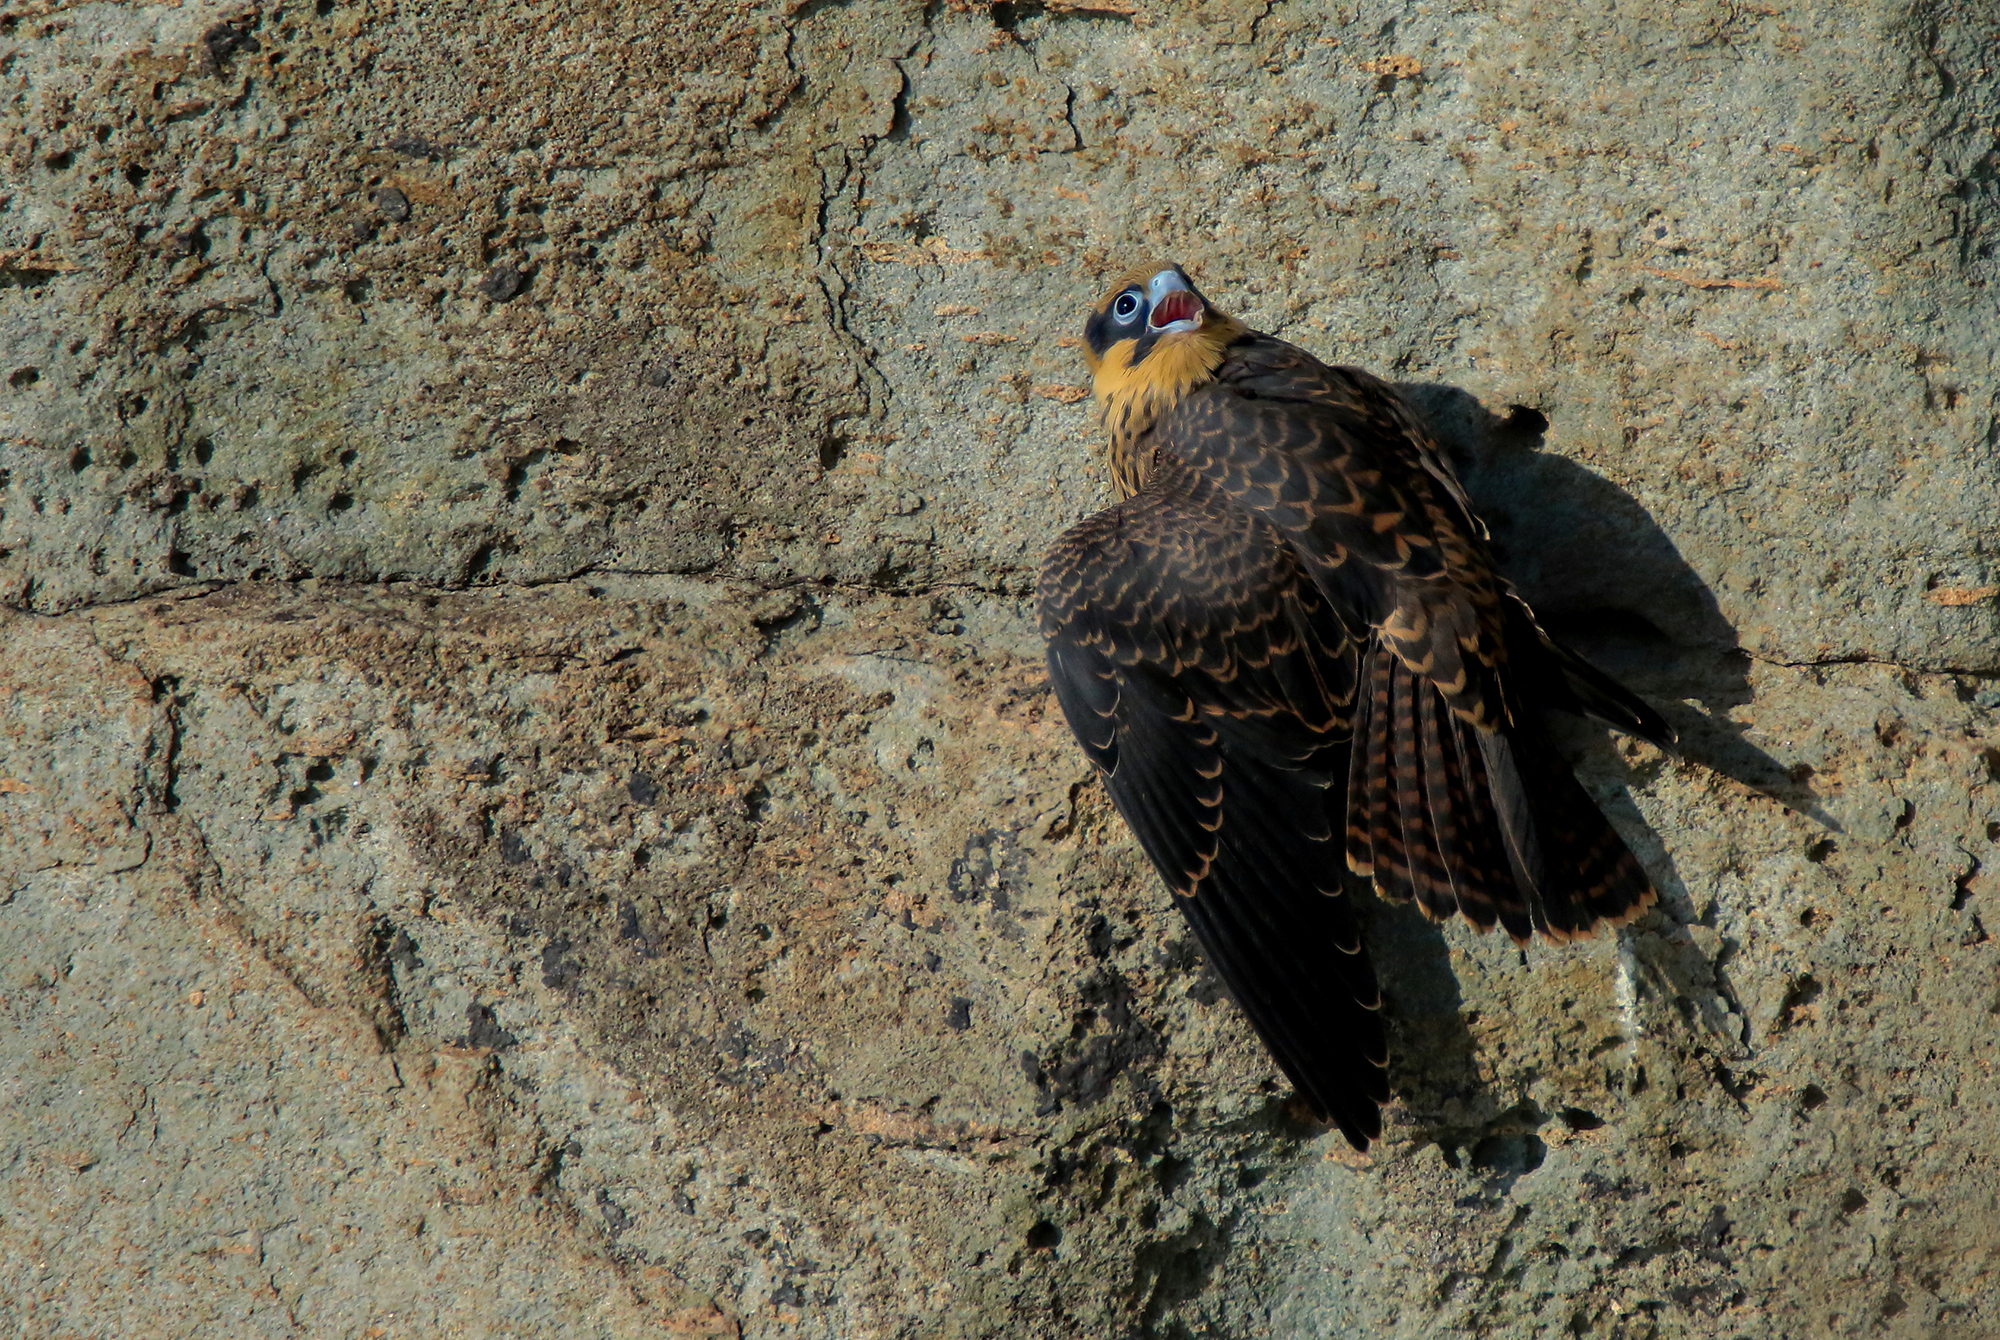 Queen's Falcon poised on the chasm...